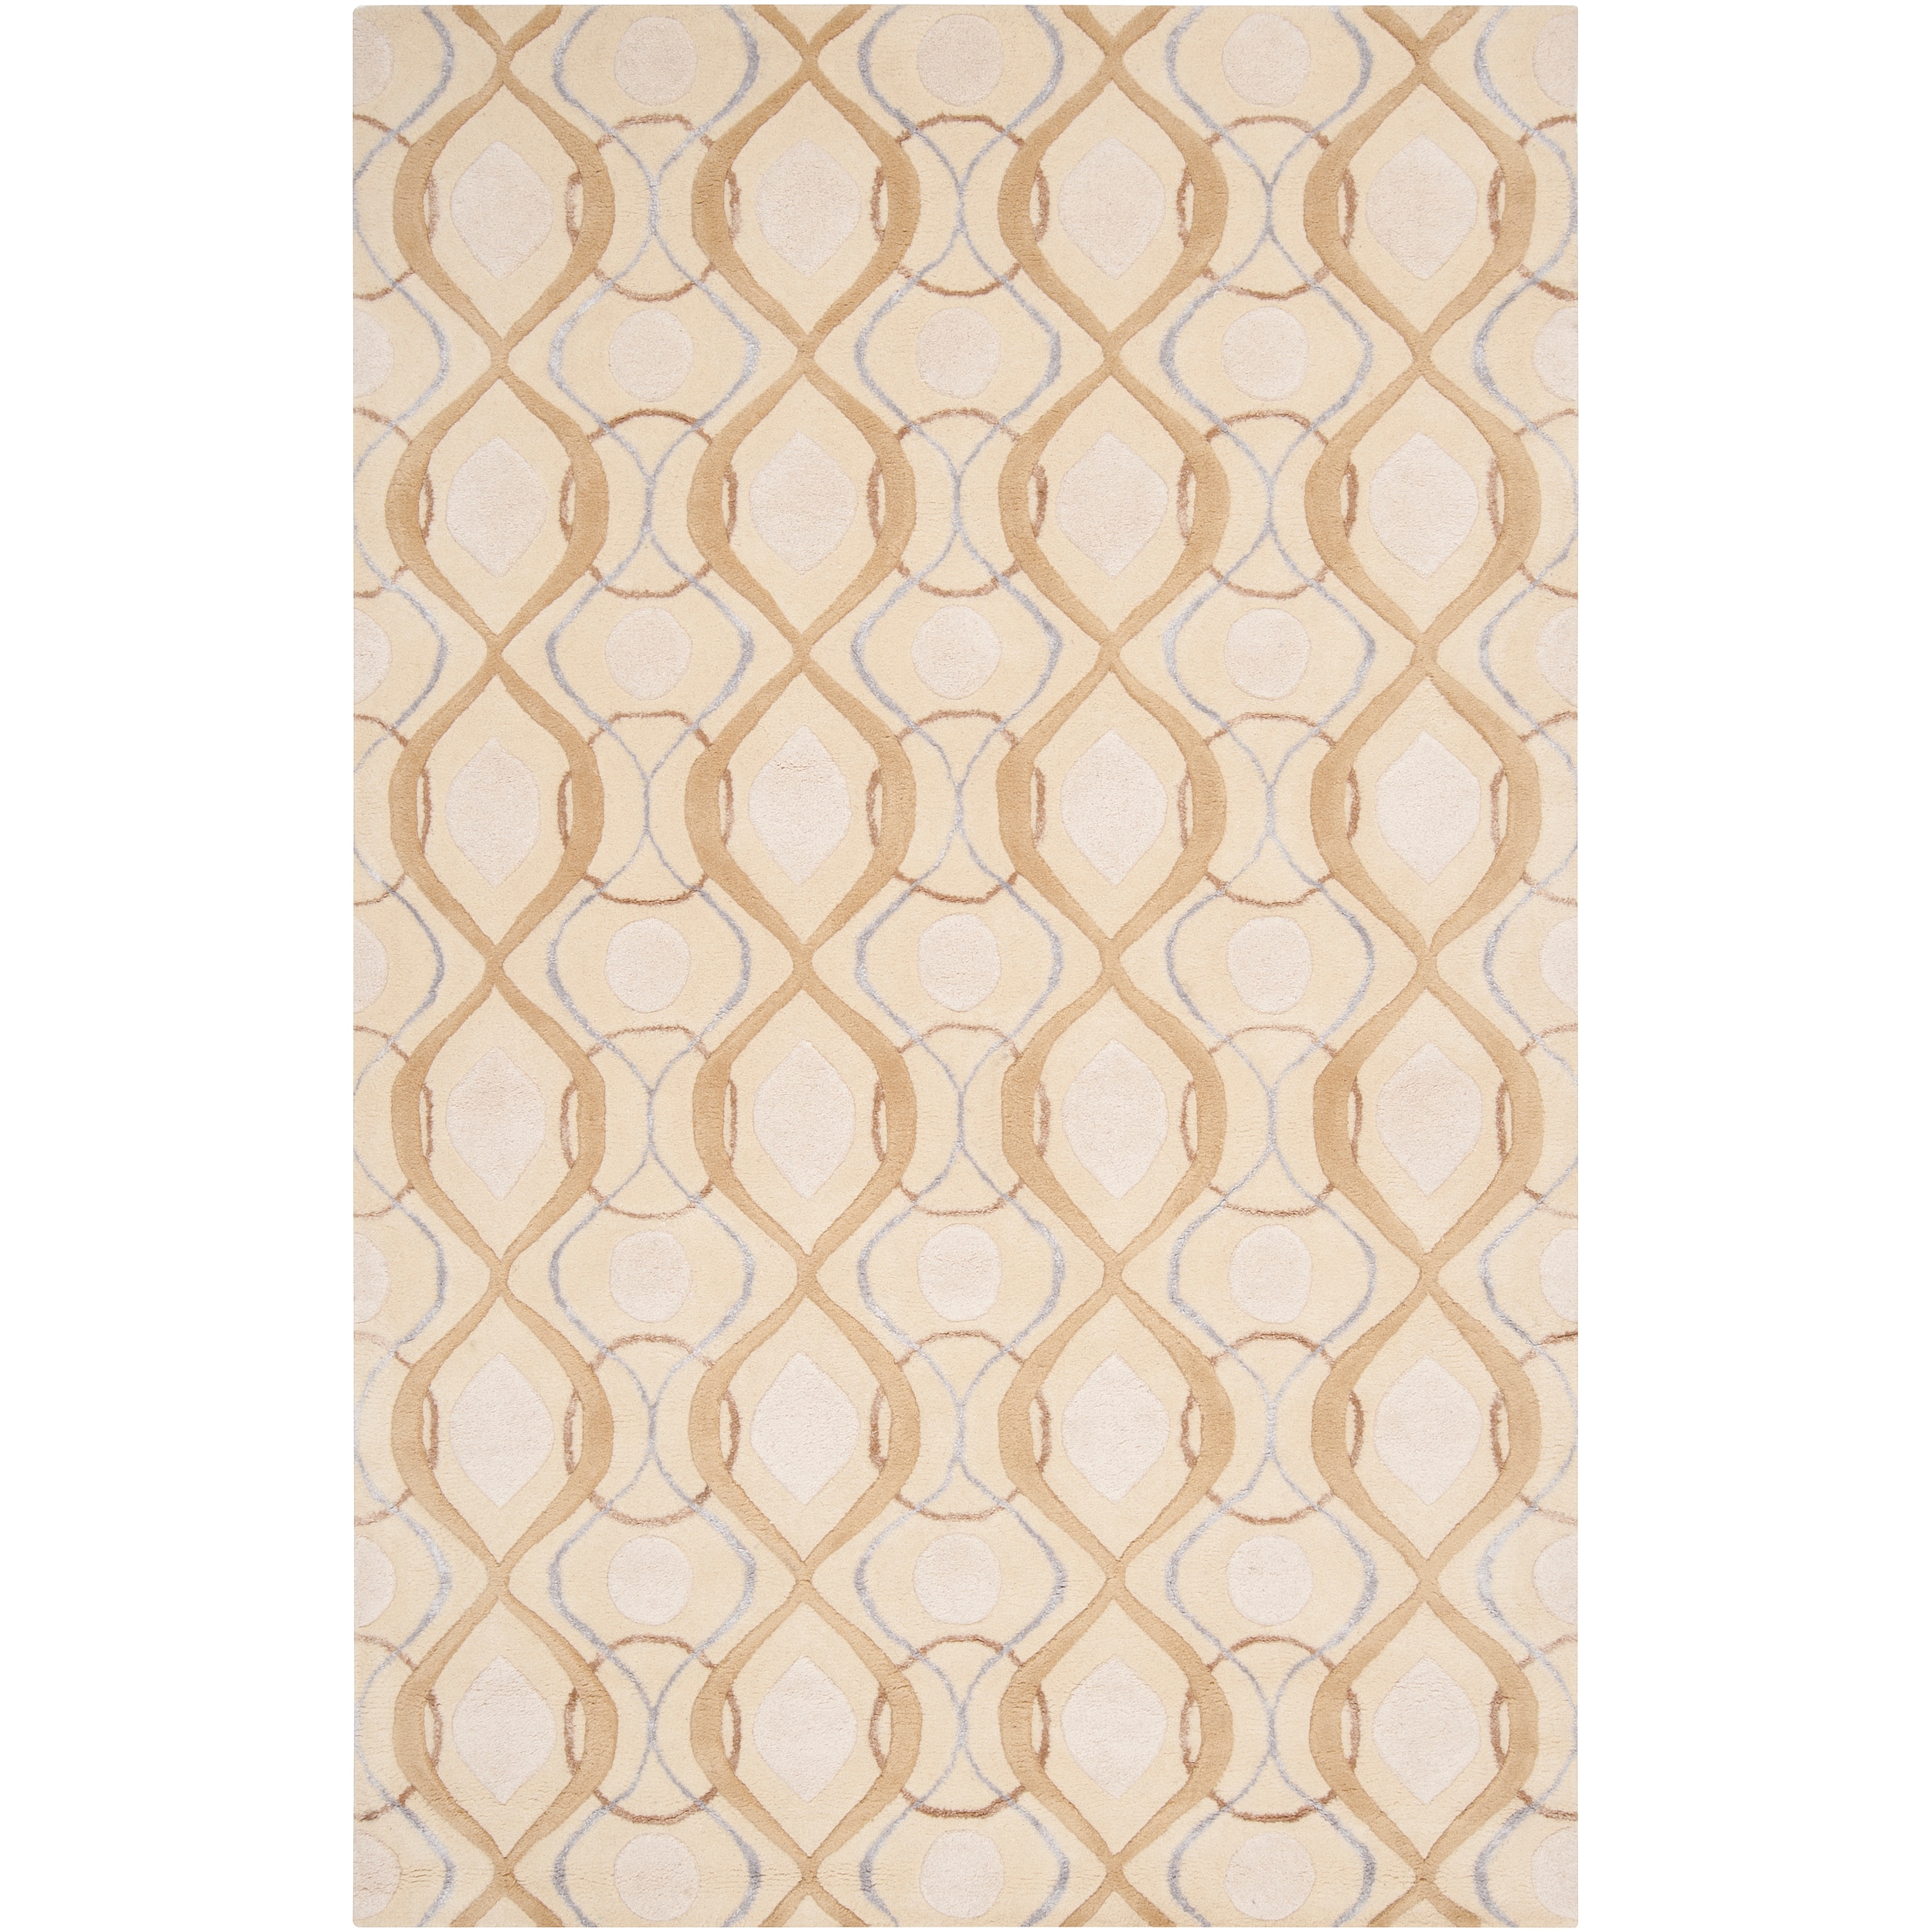 Candice Olson Hand tufted Beige Sphinx Moroccan Tile Pattern Wool Rug (5 X 8)